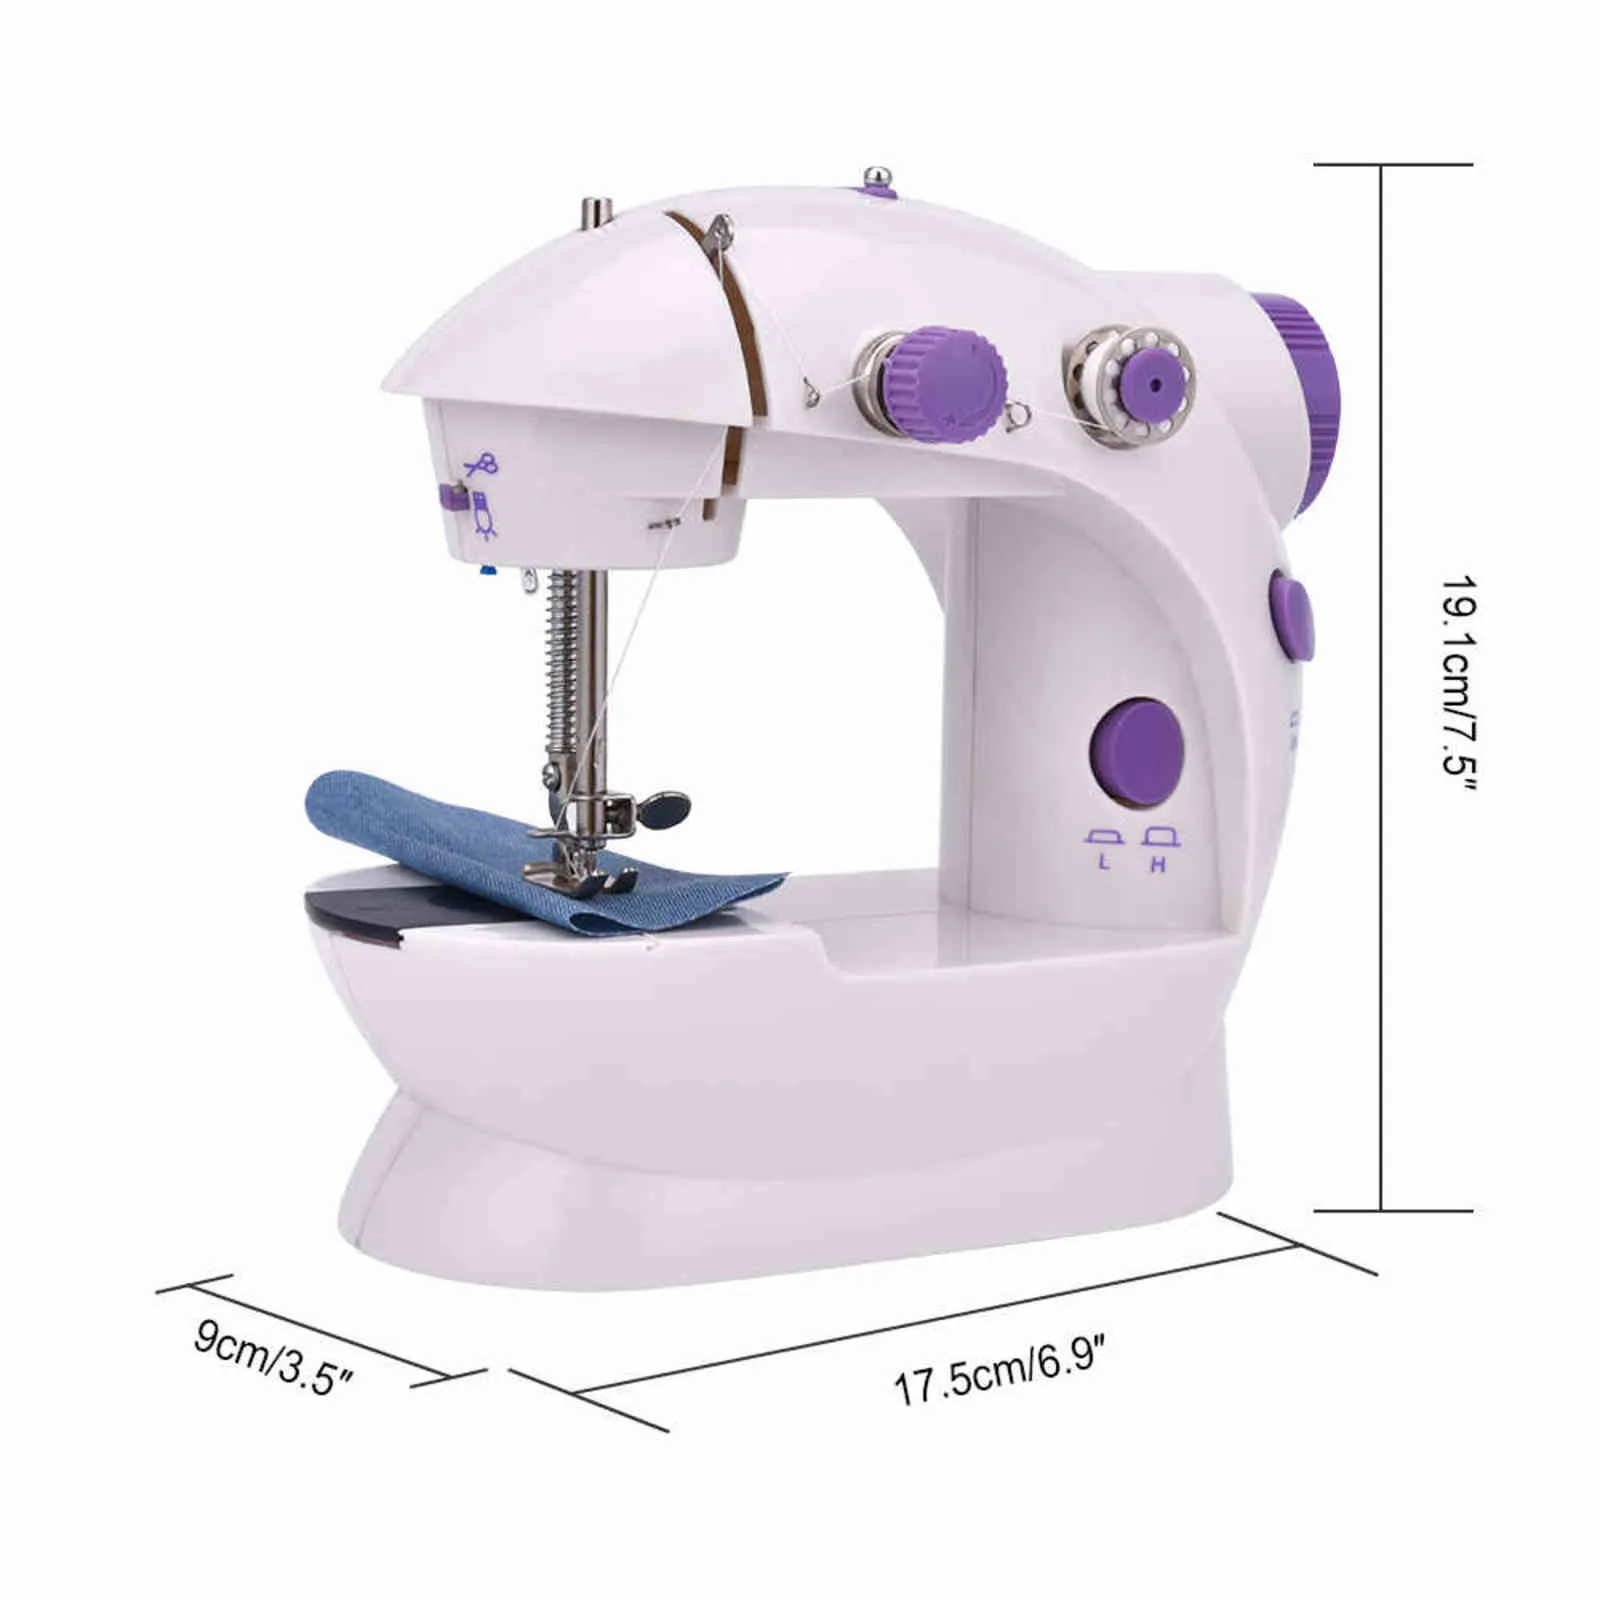 Household Hand Sewing Machine Fast Sewing Needle Needlework Cordless  Clothes Fabrics Portable Sewing Machine 2110273987868 From Ymm1, $80.48